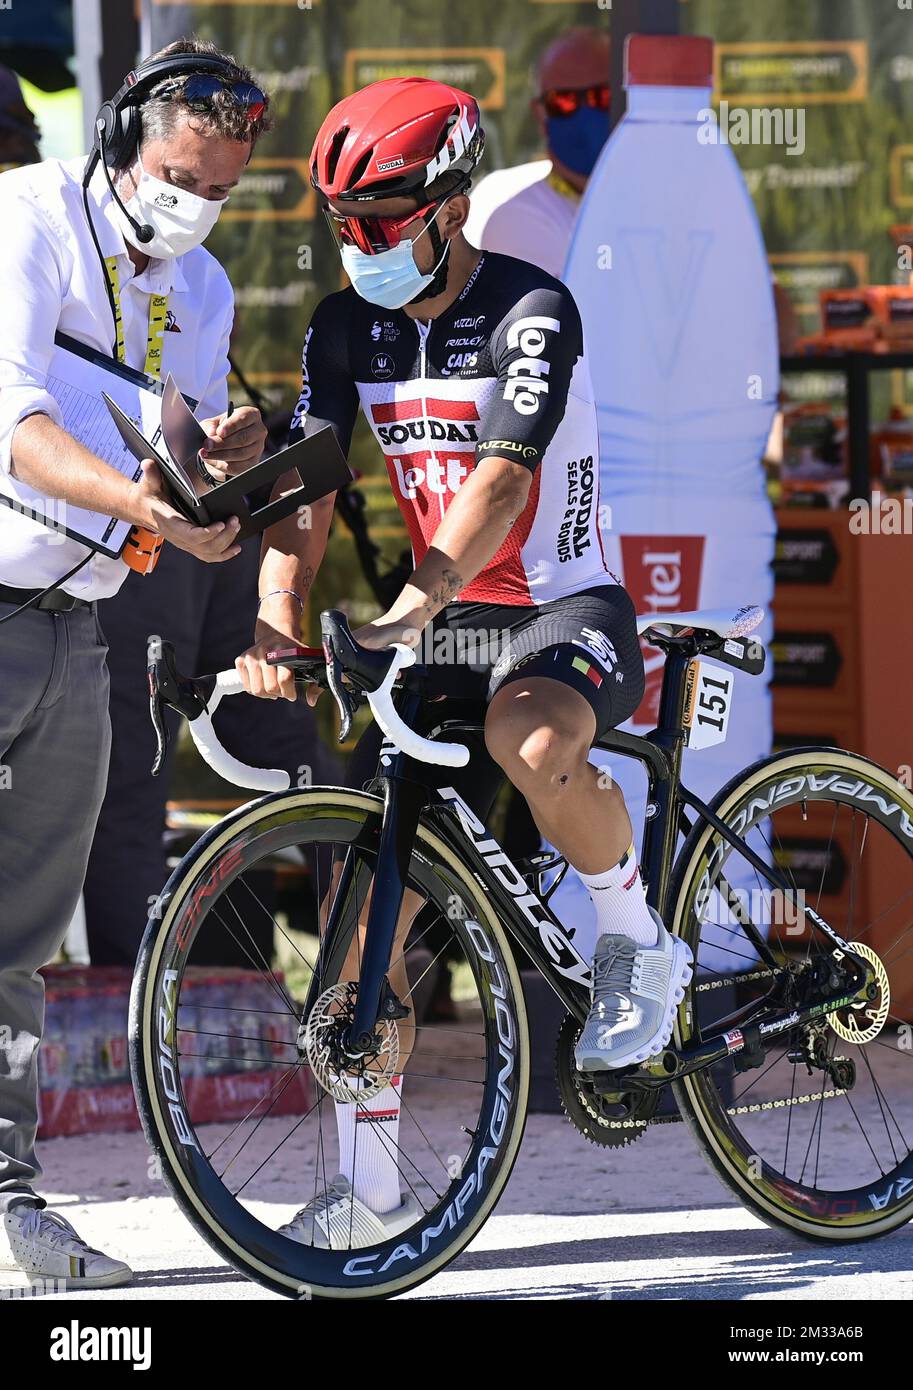 Caleb Ewan of Lotto Soudal pictured at the start of the ninth stage of the 107th edition of the Tour de France cycling race from Ile d'Oleron Le Chateau-d'Oleron to Ile de Re Saint-Martin-de-Re (168,5km), in France, Tuesday 08 September 2020. This year's Tour de France was postponed due to the worldwide Covid-19 pandemic. The 2020 race starts in Nice on Saturday 29 August and ends on 20 September. BELGA PHOTO POOL PETER DE VOECHT Stock Photo